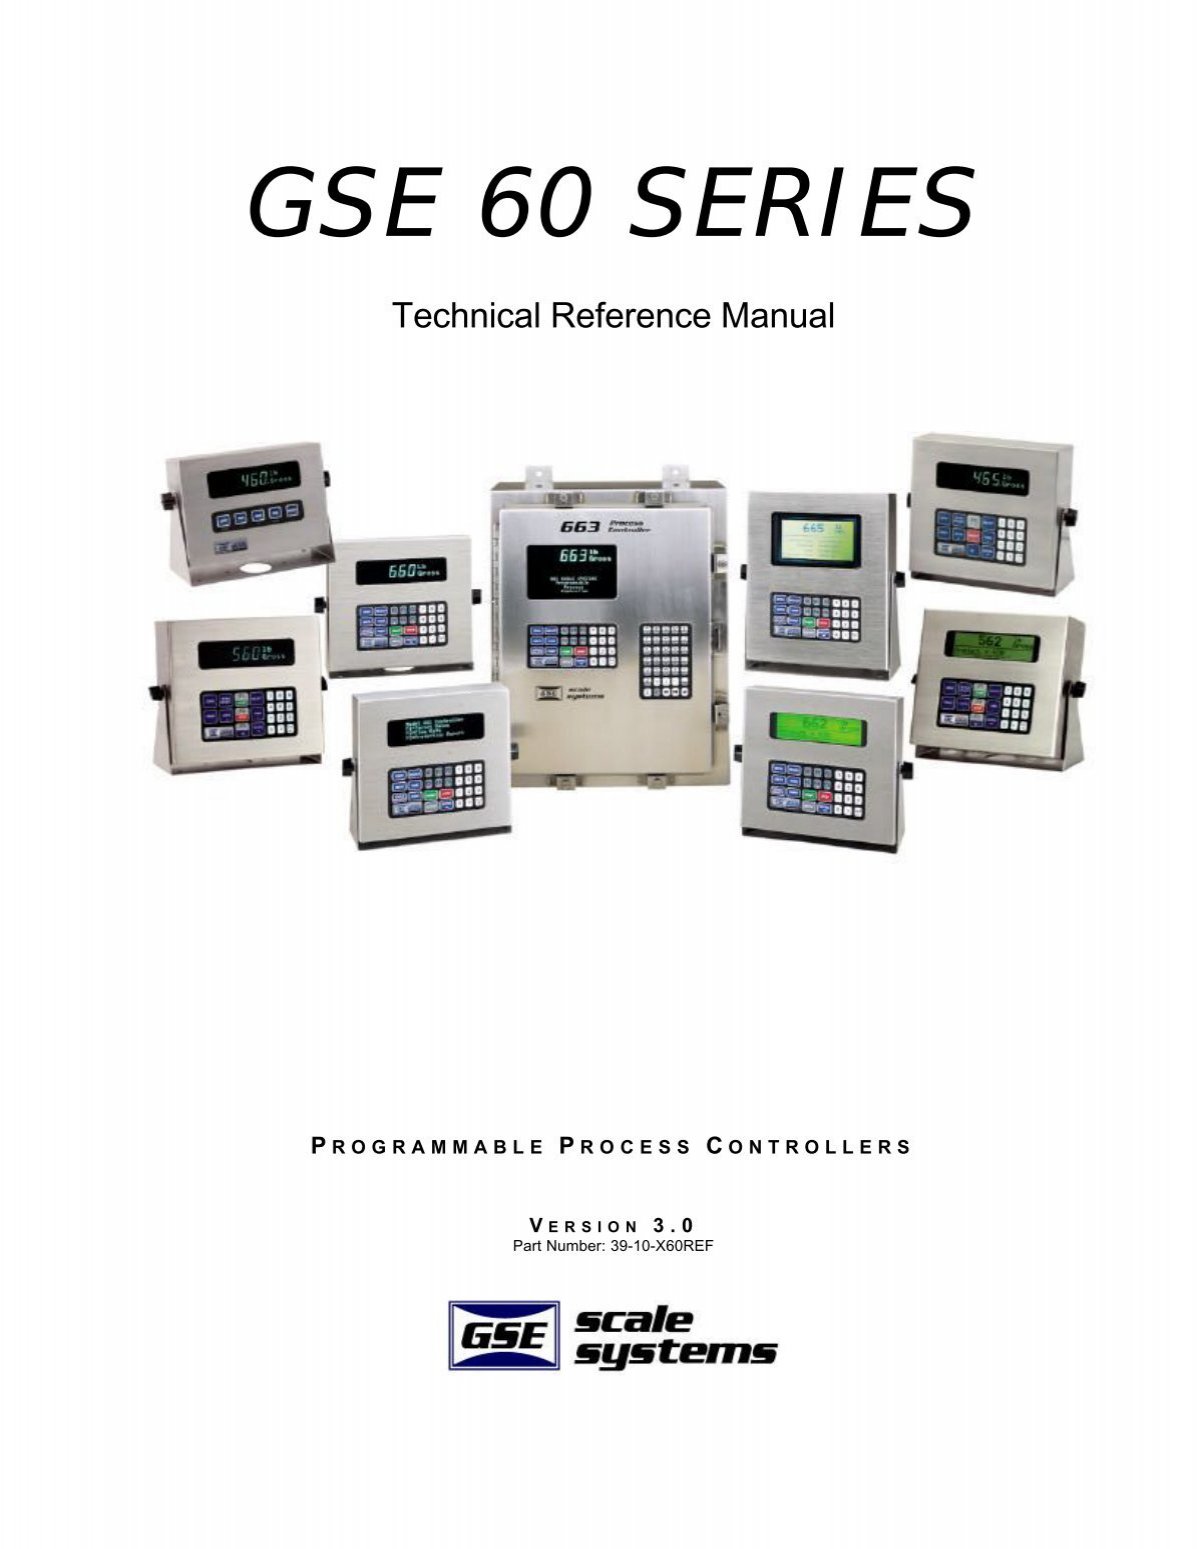 gse 60 series master technical manual - Industrial Commercial Scales